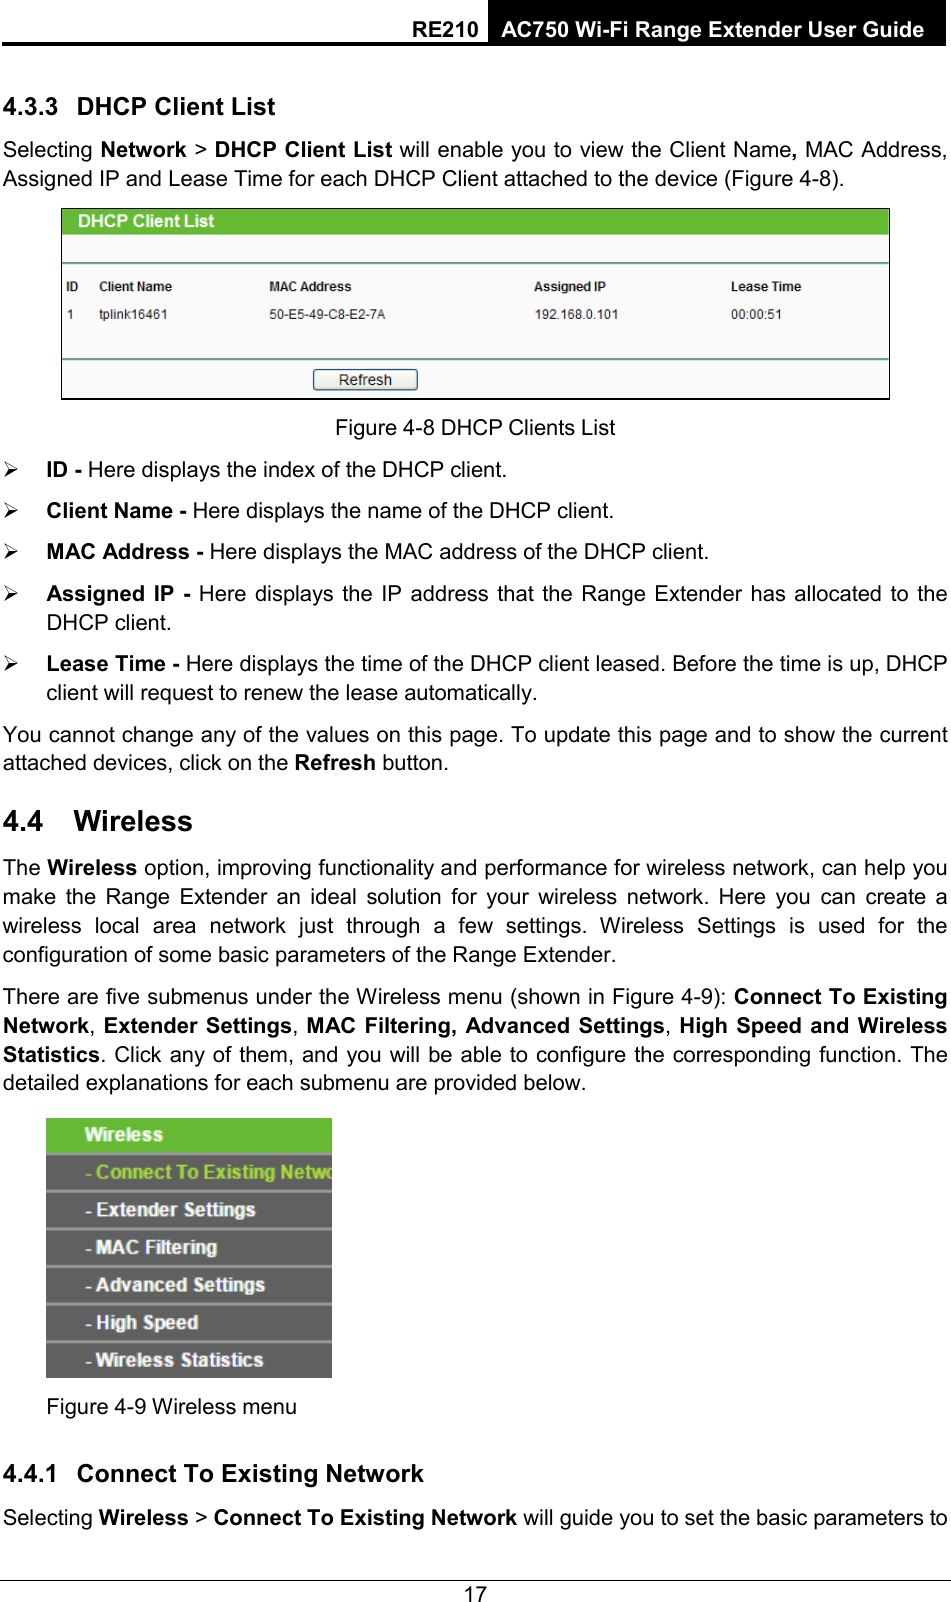 RE210 AC750 Wi-Fi Range Extender User Guide  4.3.3 DHCP Client List Selecting Network &gt; DHCP Client List will enable you to view the Client Name, MAC Address, Assigned IP and Lease Time for each DHCP Client attached to the device (Figure 4-8).  Figure 4-8 DHCP Clients List  ID - Here displays the index of the DHCP client.  Client Name - Here displays the name of the DHCP client.  MAC Address - Here displays the MAC address of the DHCP client.  Assigned IP - Here displays the IP address that the Range Extender has allocated to the DHCP client.  Lease Time - Here displays the time of the DHCP client leased. Before the time is up, DHCP client will request to renew the lease automatically. You cannot change any of the values on this page. To update this page and to show the current attached devices, click on the Refresh button. 4.4 Wireless The Wireless option, improving functionality and performance for wireless network, can help you make the Range Extender an ideal solution for your wireless network. Here you can create a wireless local area network just through a few settings. Wireless Settings is used for the configuration of some basic parameters of the Range Extender. There are five submenus under the Wireless menu (shown in Figure 4-9): Connect To Existing Network, Extender Settings, MAC Filtering, Advanced Settings, High Speed and Wireless Statistics. Click any of them, and you will be able to configure the corresponding function. The detailed explanations for each submenu are provided below.  Figure 4-9 Wireless menu 4.4.1 Connect To Existing Network Selecting Wireless &gt; Connect To Existing Network will guide you to set the basic parameters to 17 